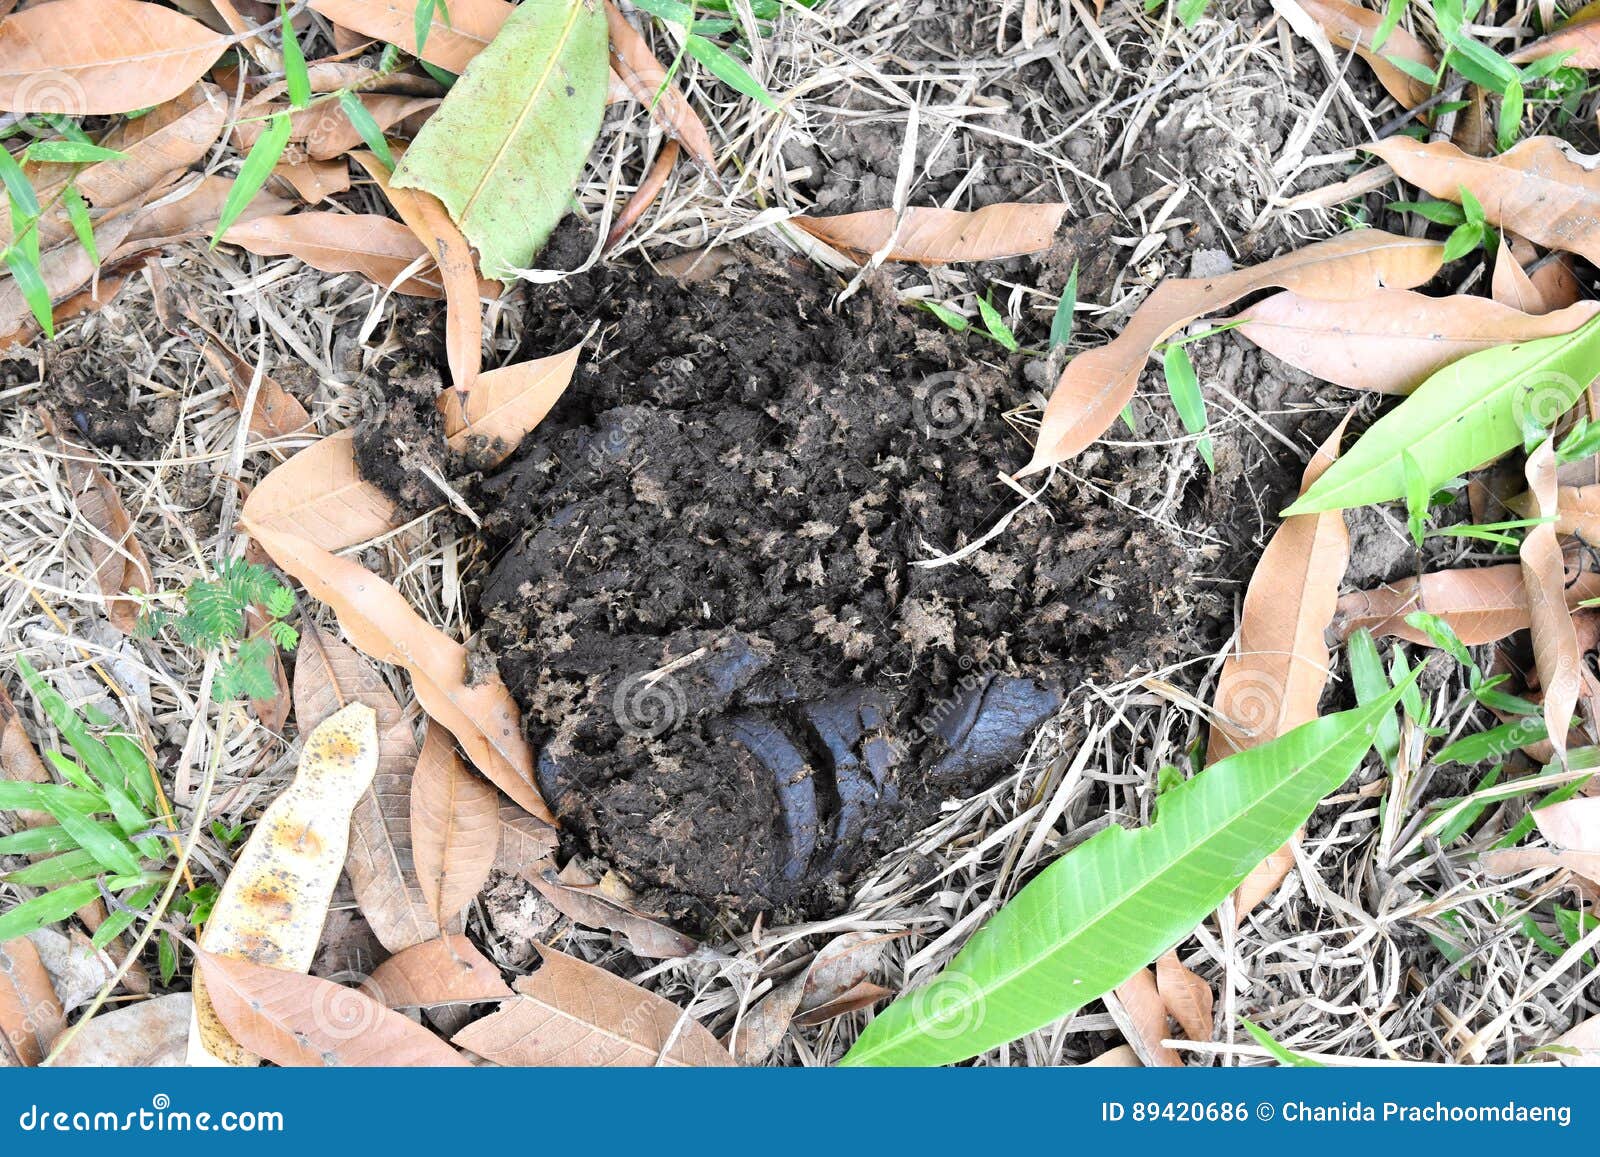 Fresh Cow Dung On Ground May At Outdoor Stock Photo Image Of